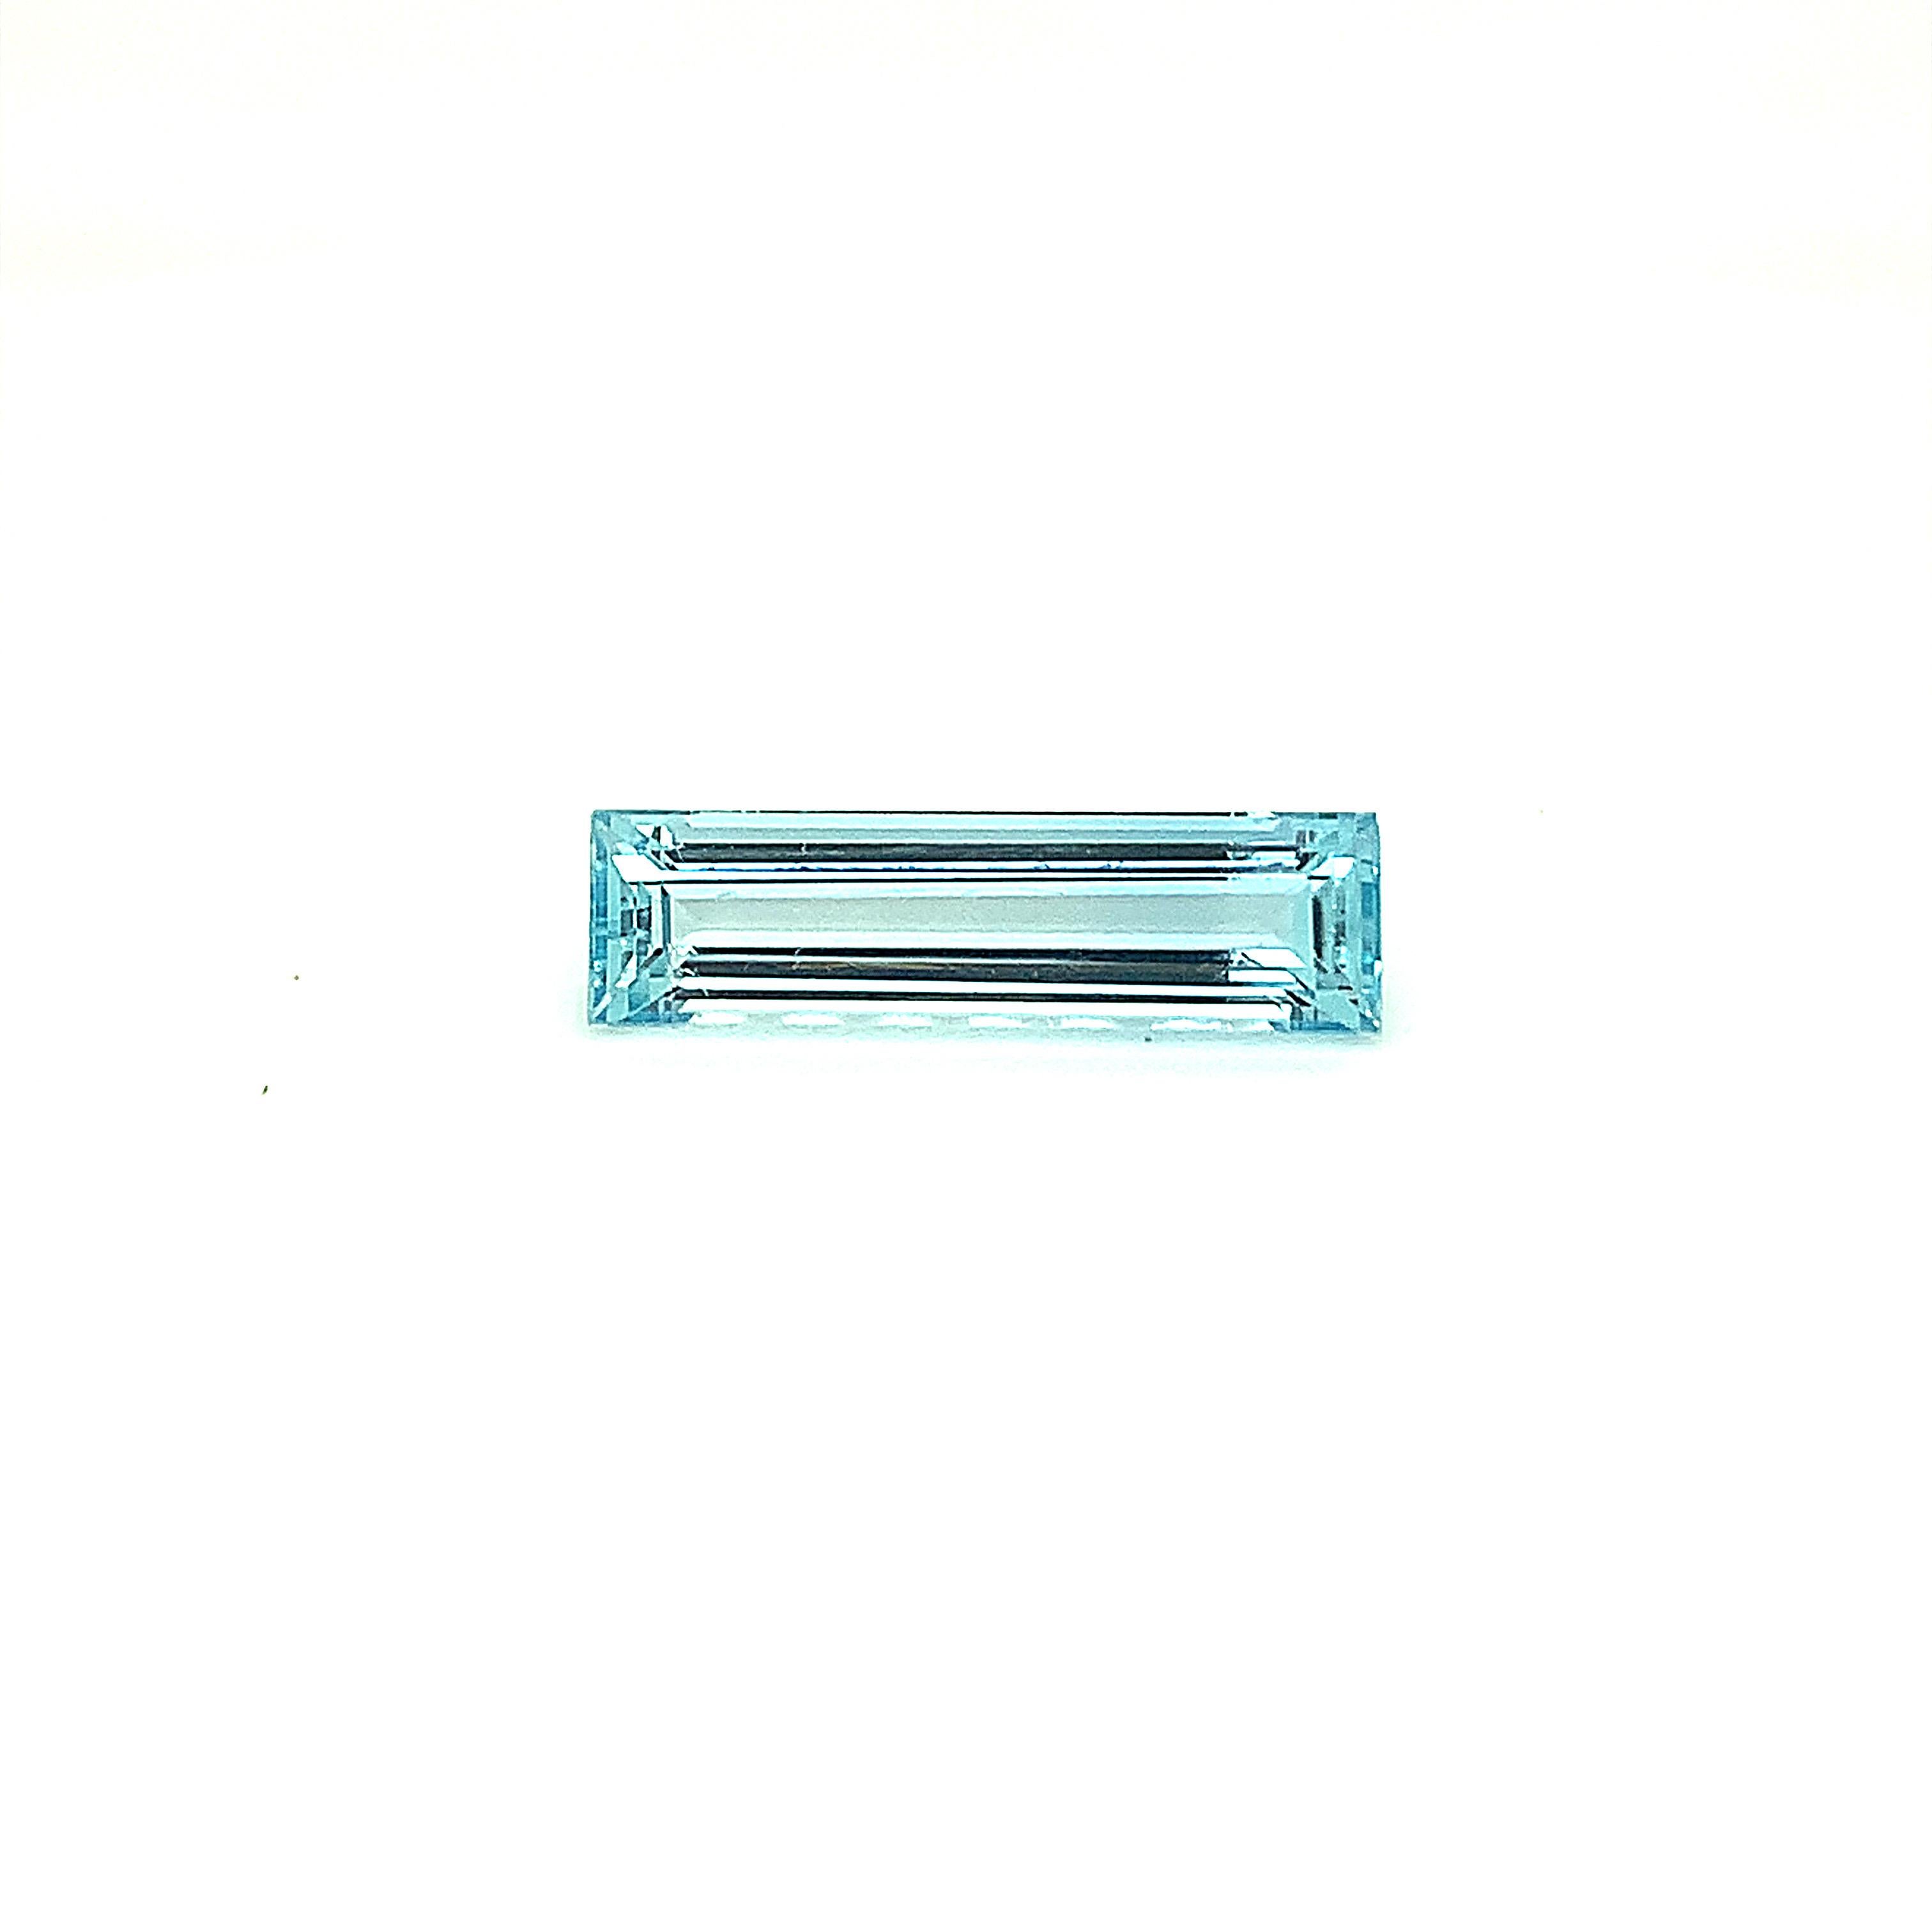 Elongated Emerald Cut Aquamarine in vivid blue color is a natural loose stone. This flawless hand cut and polished gem measures 24.42mm x 6.56mm X 4.94mm and weighs 8.55 carat. It can be crafted into a fine piece of jewelry according to your